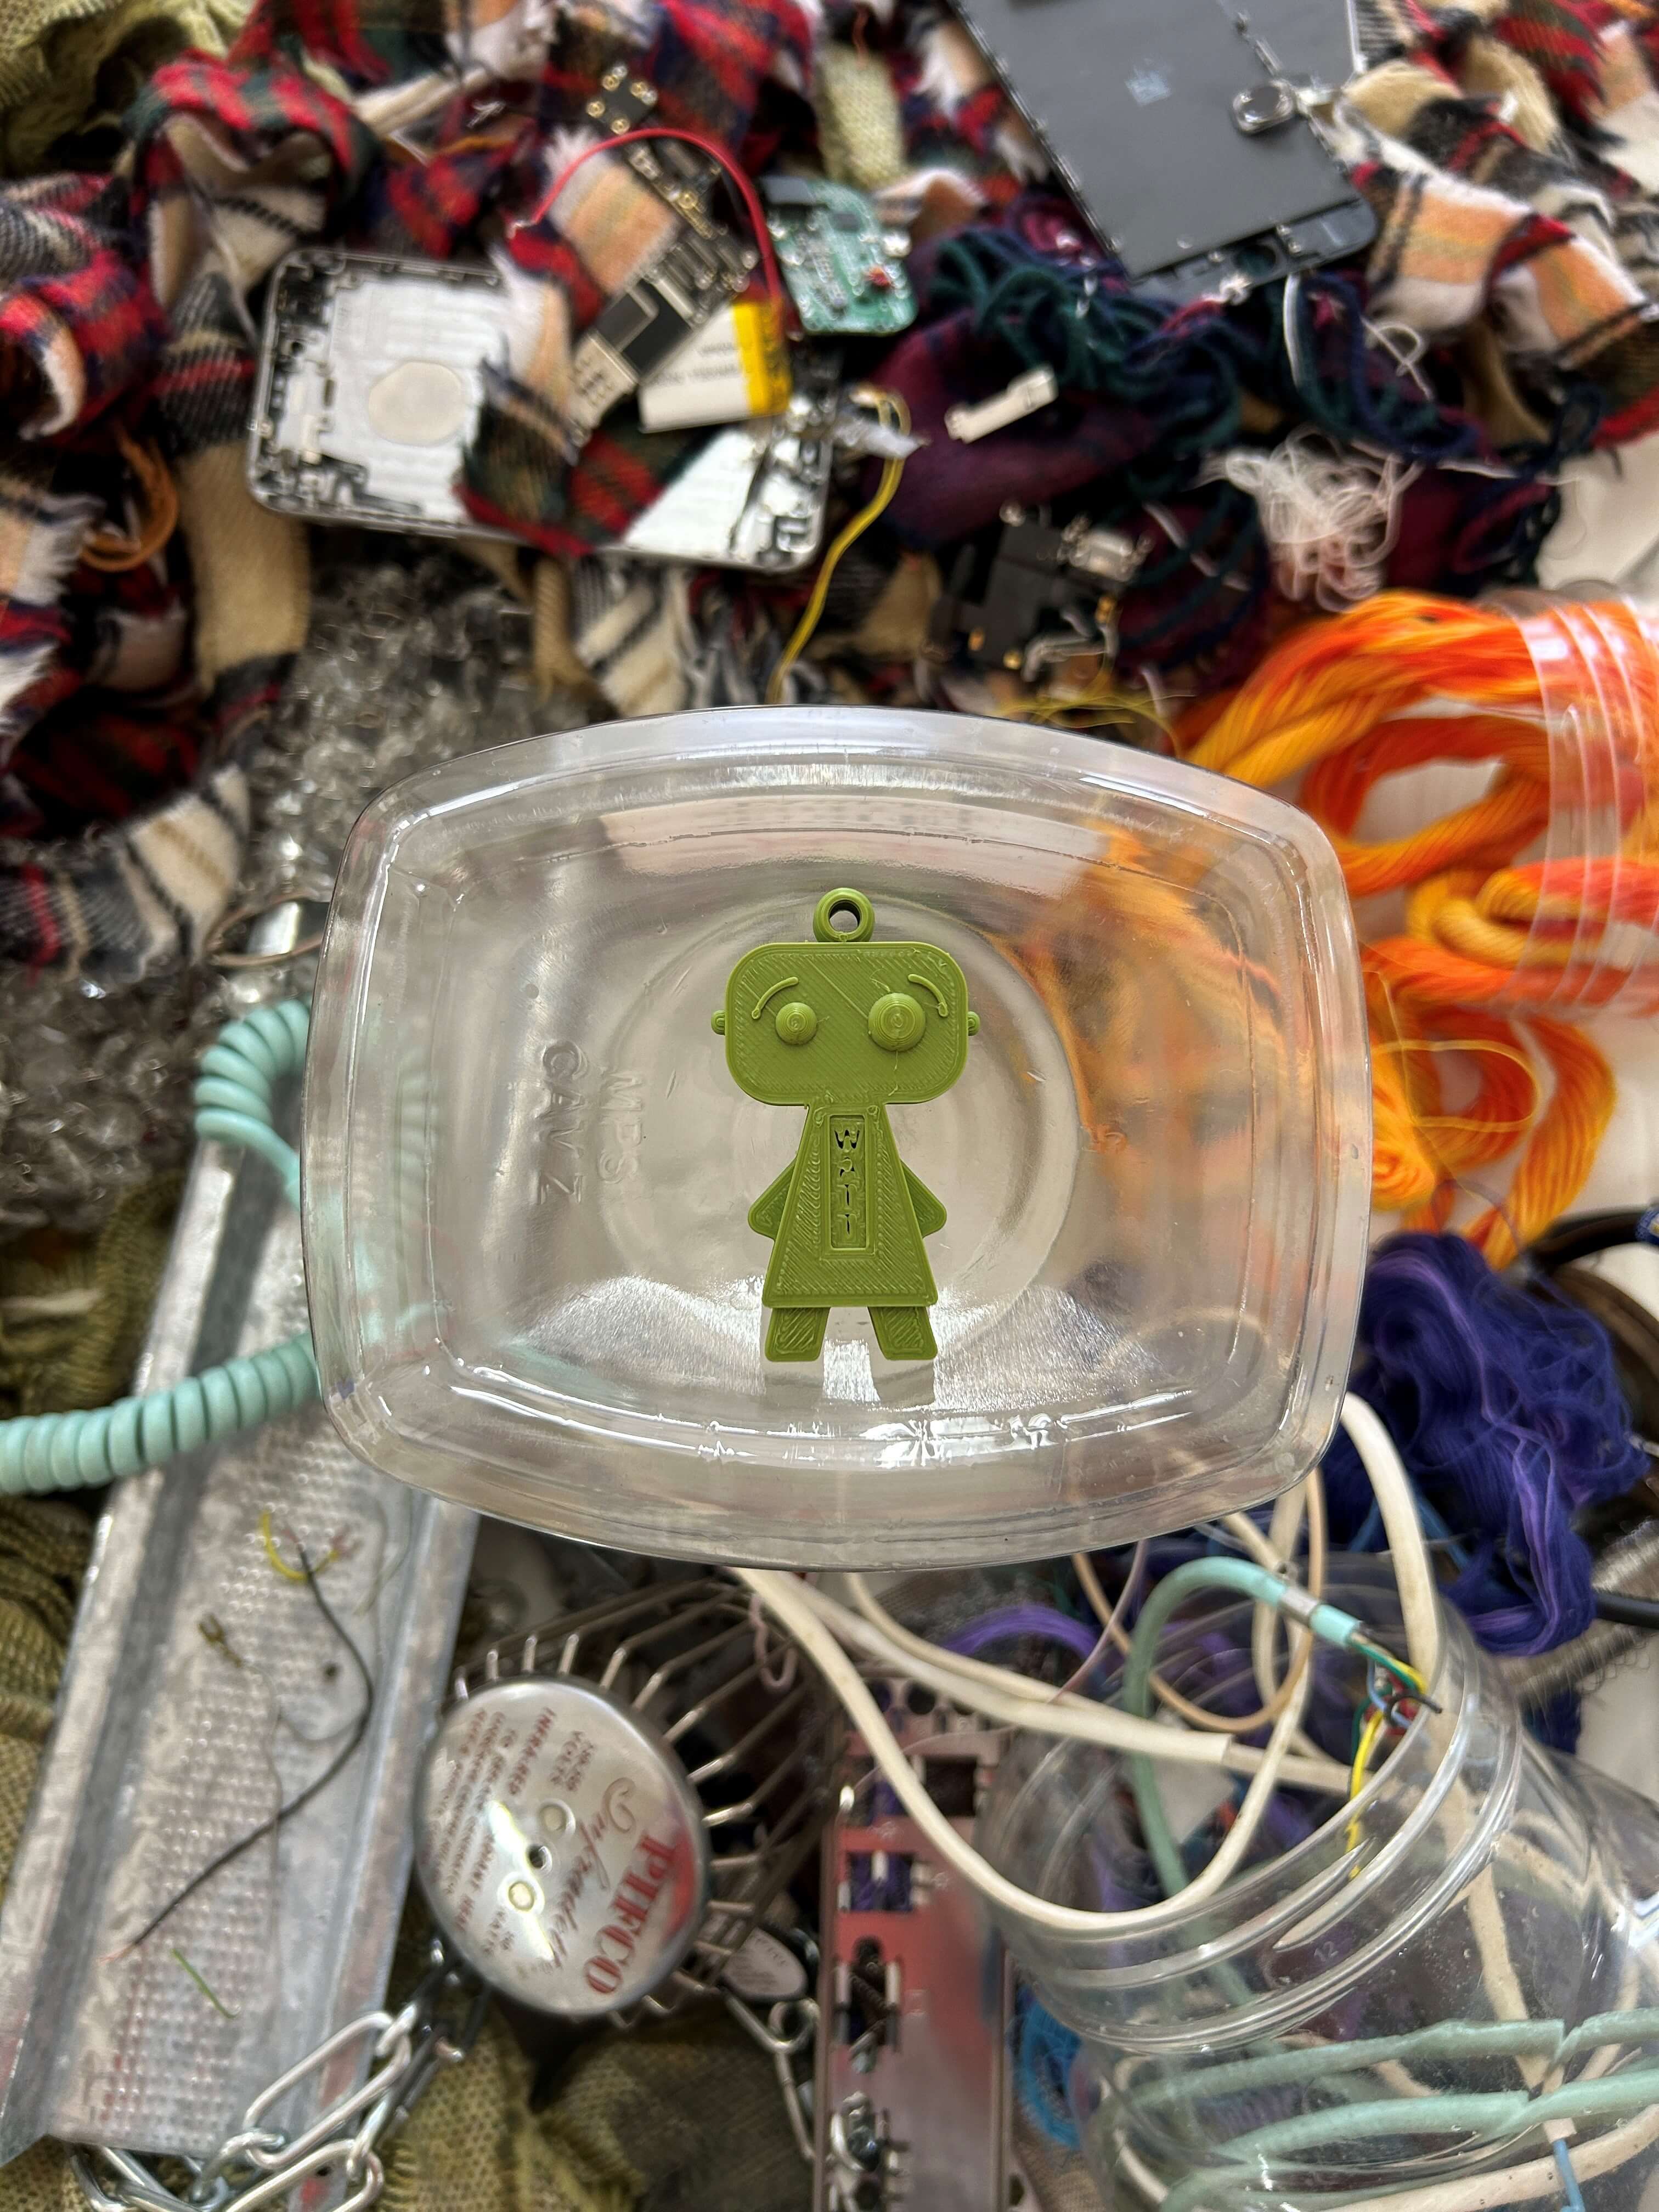 Picture of a small 3D printed robot sat amongst rubbish